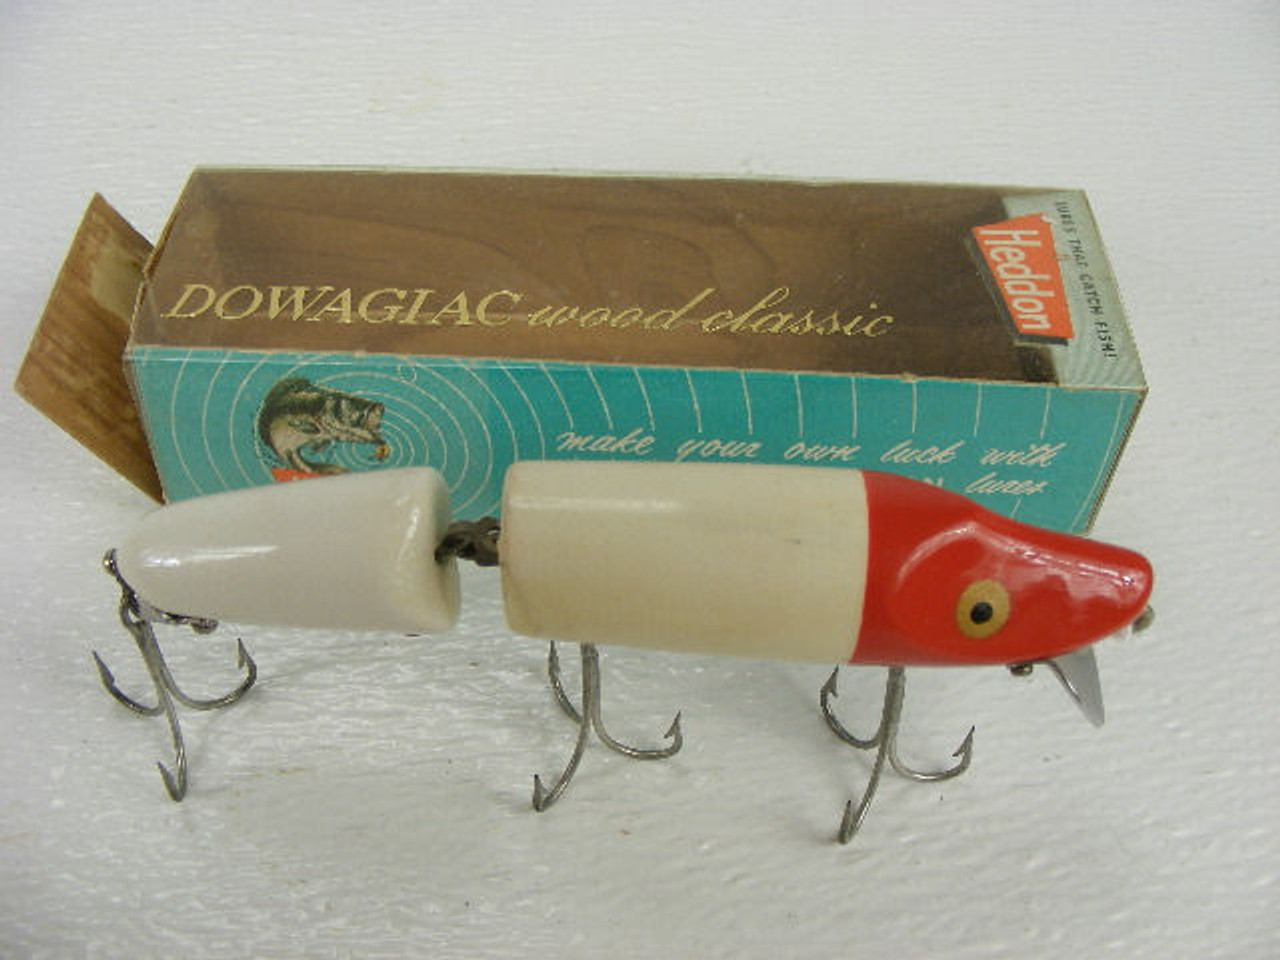 A 5 vintage Heddon Dowagiac Jointed Vamp wood lure #7300RH with the  original box from the 1960s.